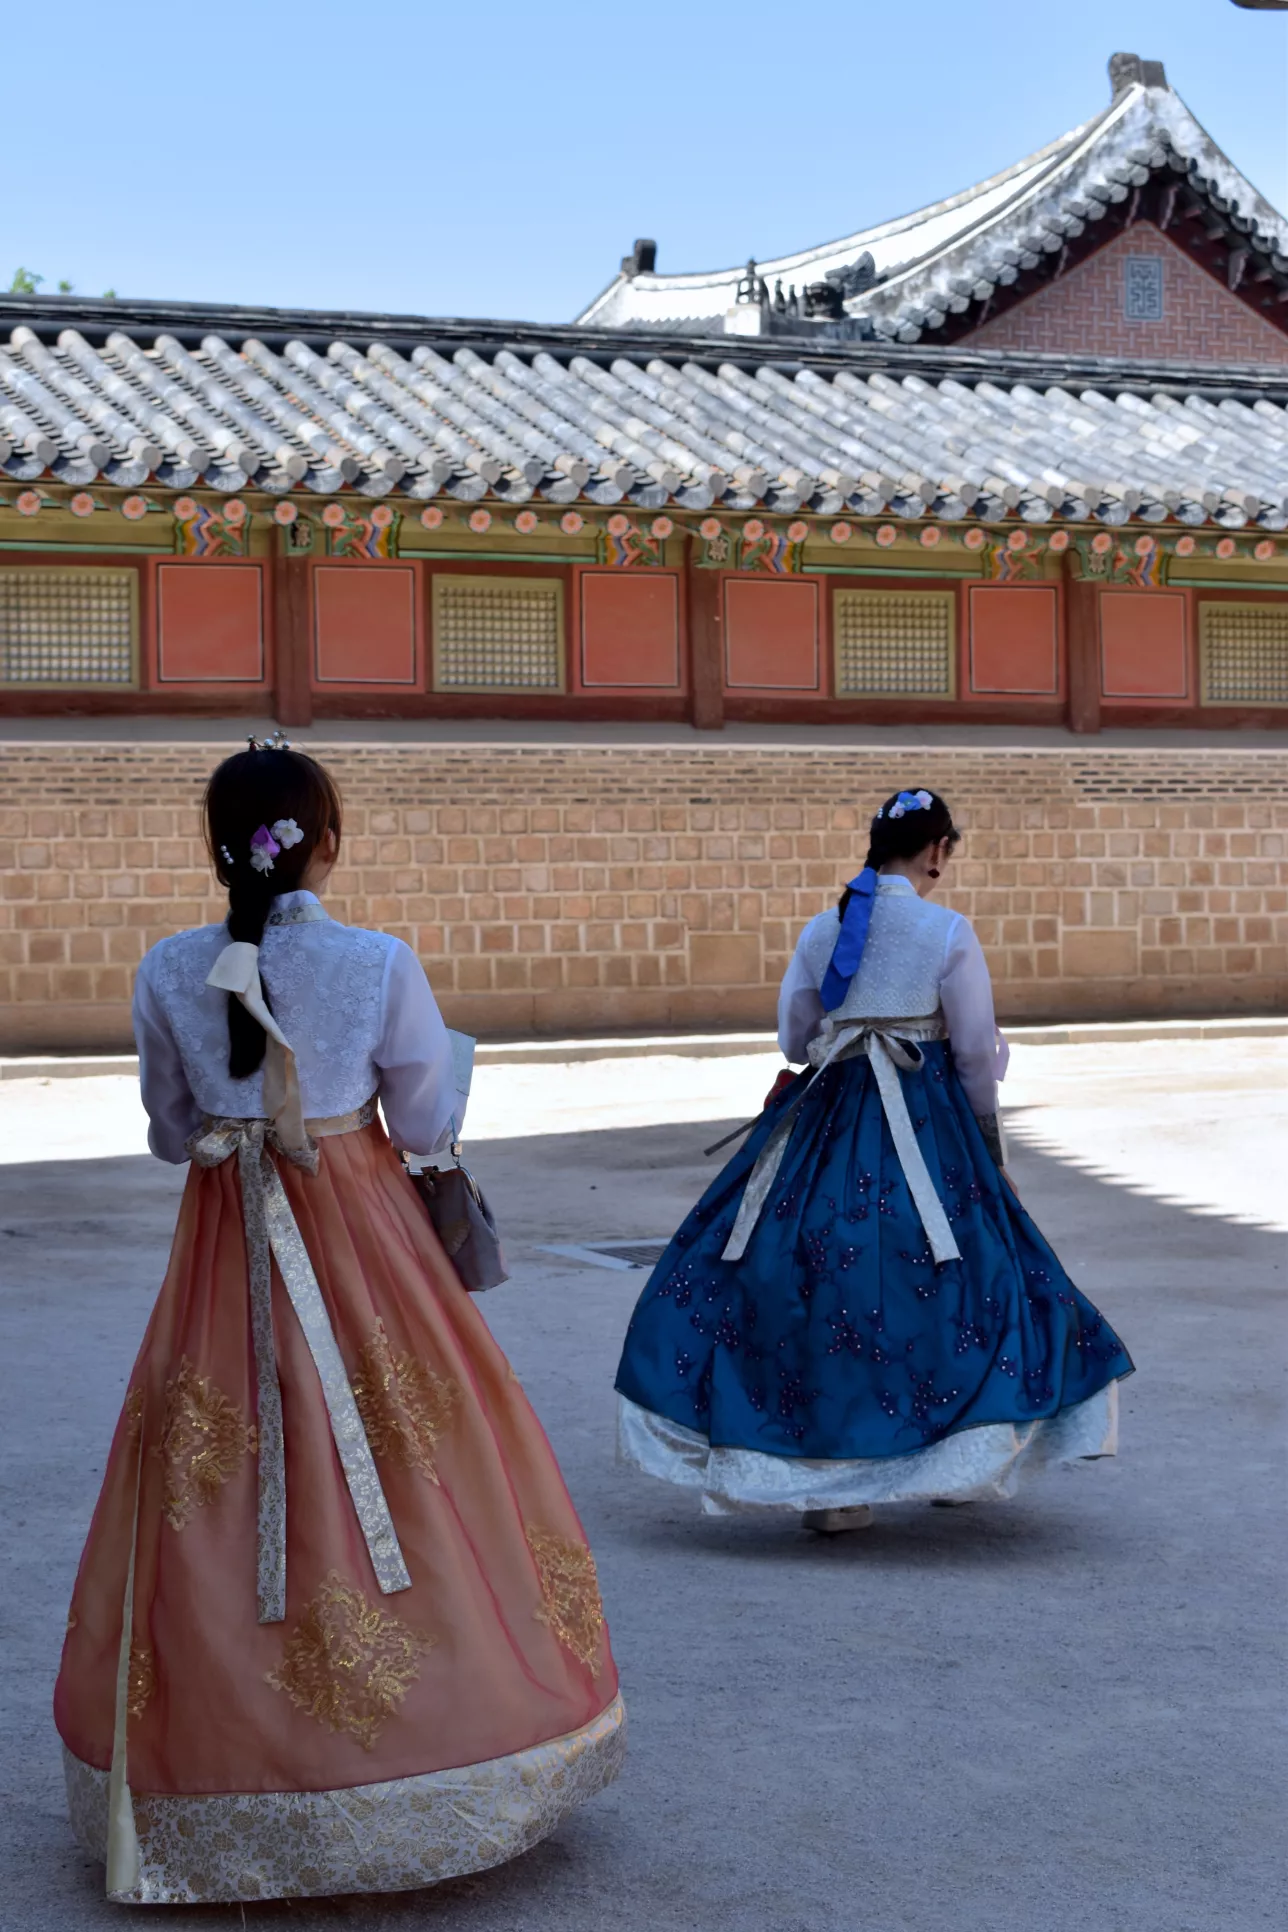 Two women in traditional dresses, Korea. Photo.